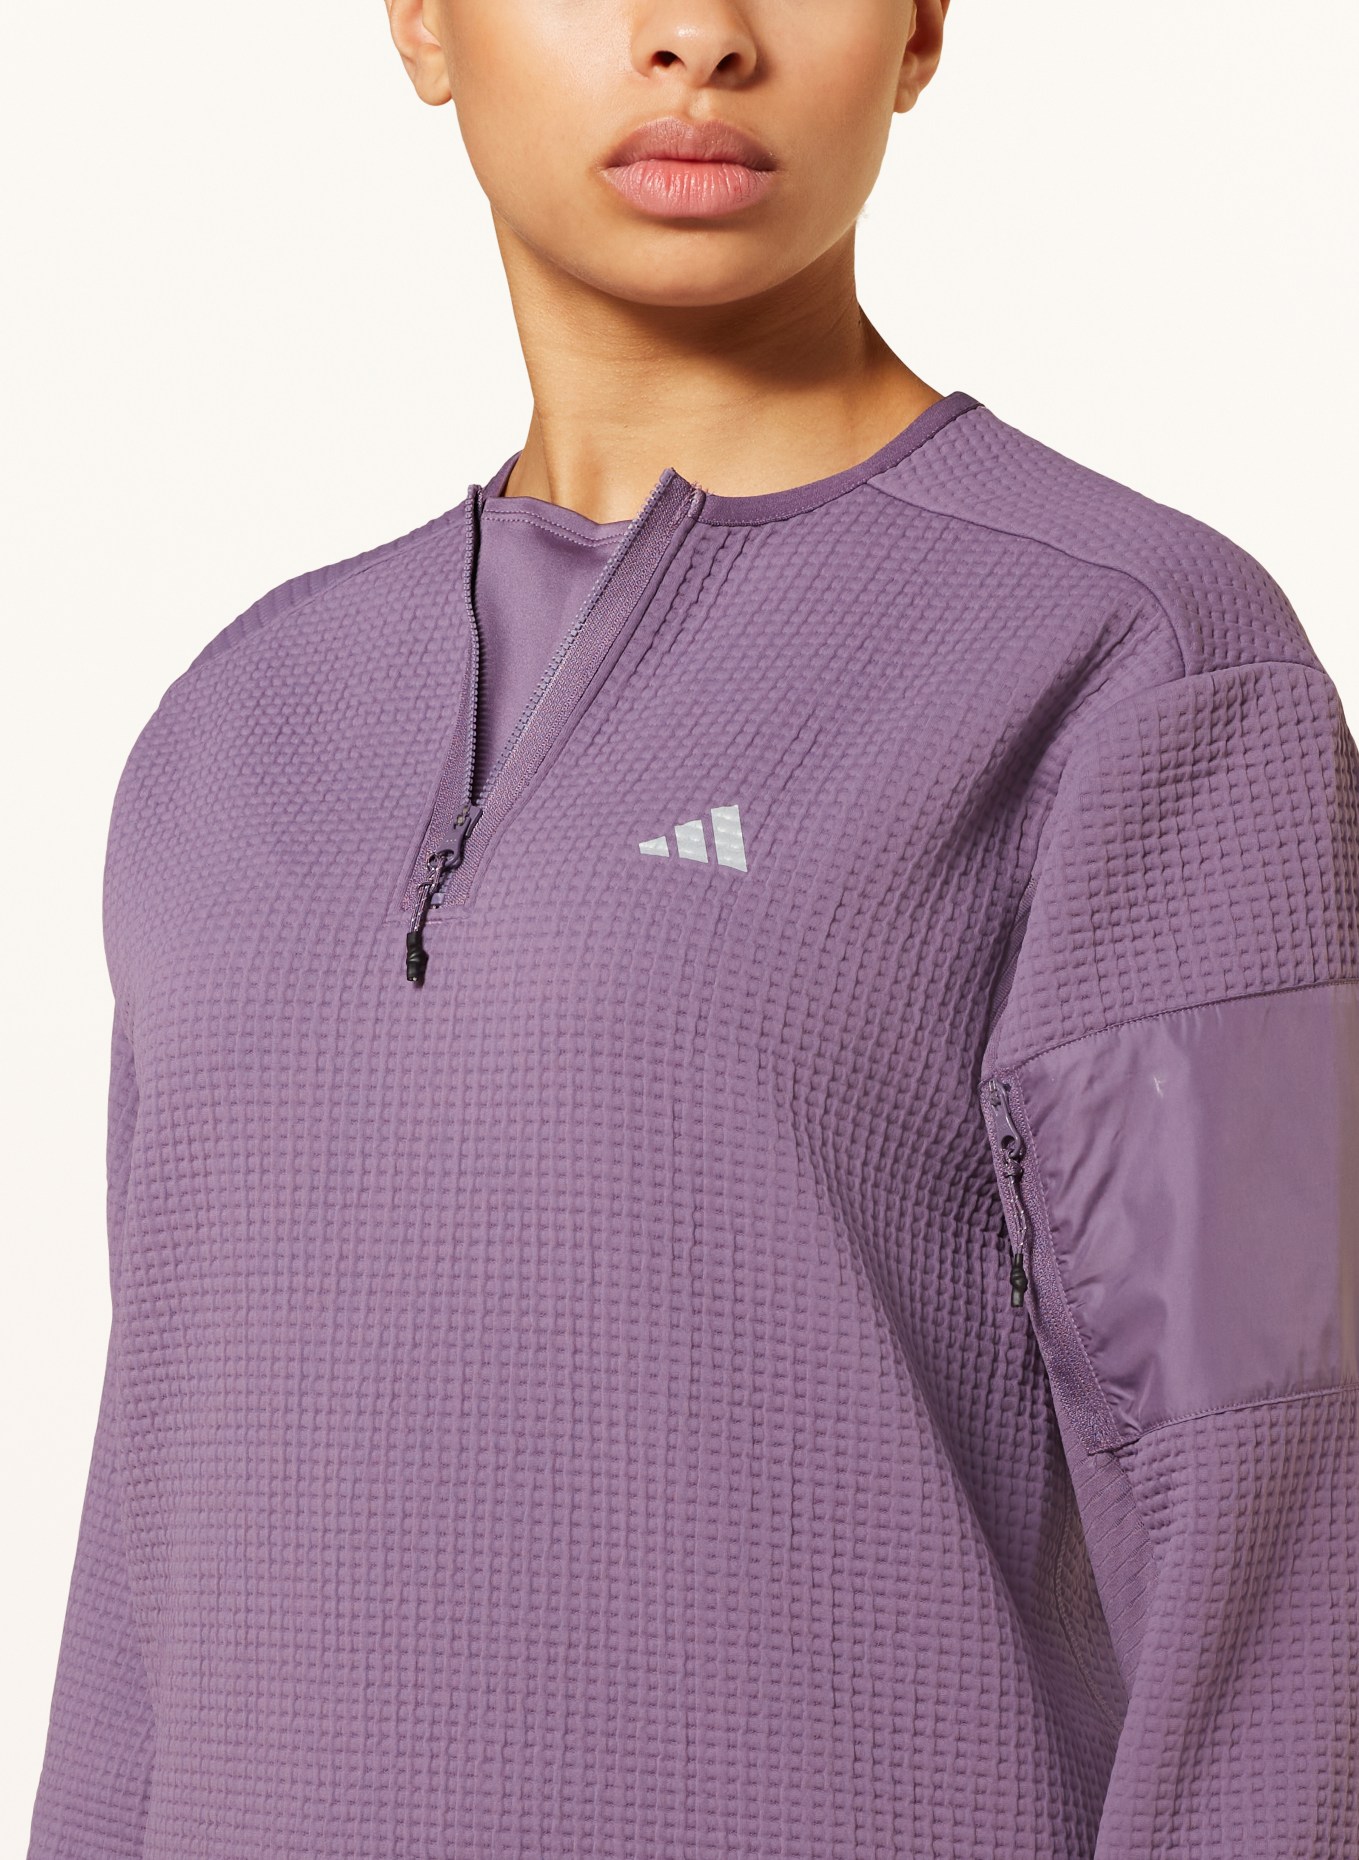 adidas Laufshirt ULTIMATE RUNNING CONQUER THE ELEMENTS, Farbe: LILA (Bild 4)